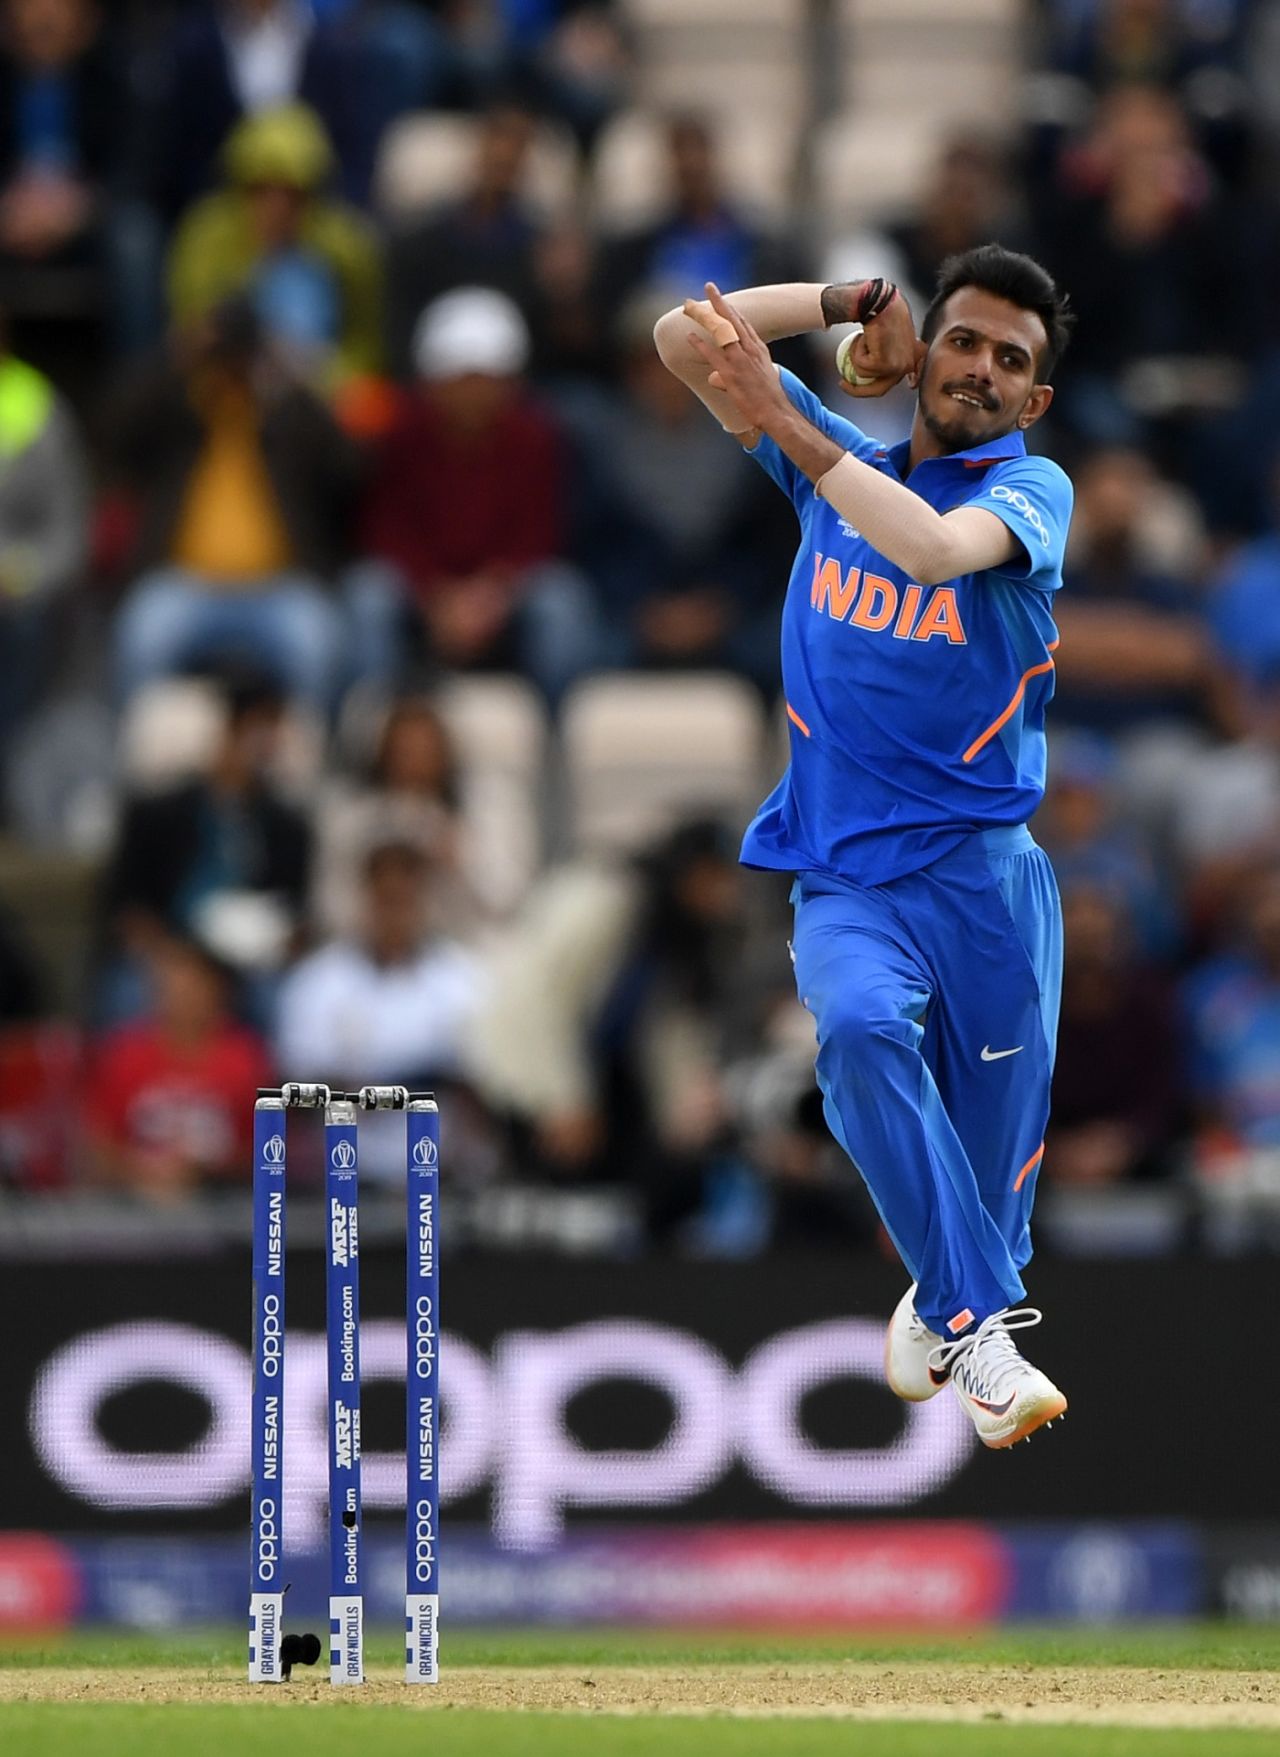 Yuzvendra Chahal broke the partnership between Faf du Plessis and Rassie van der Dussen, India v South Africa, Southampton, World Cup 2019, June 5, 2019